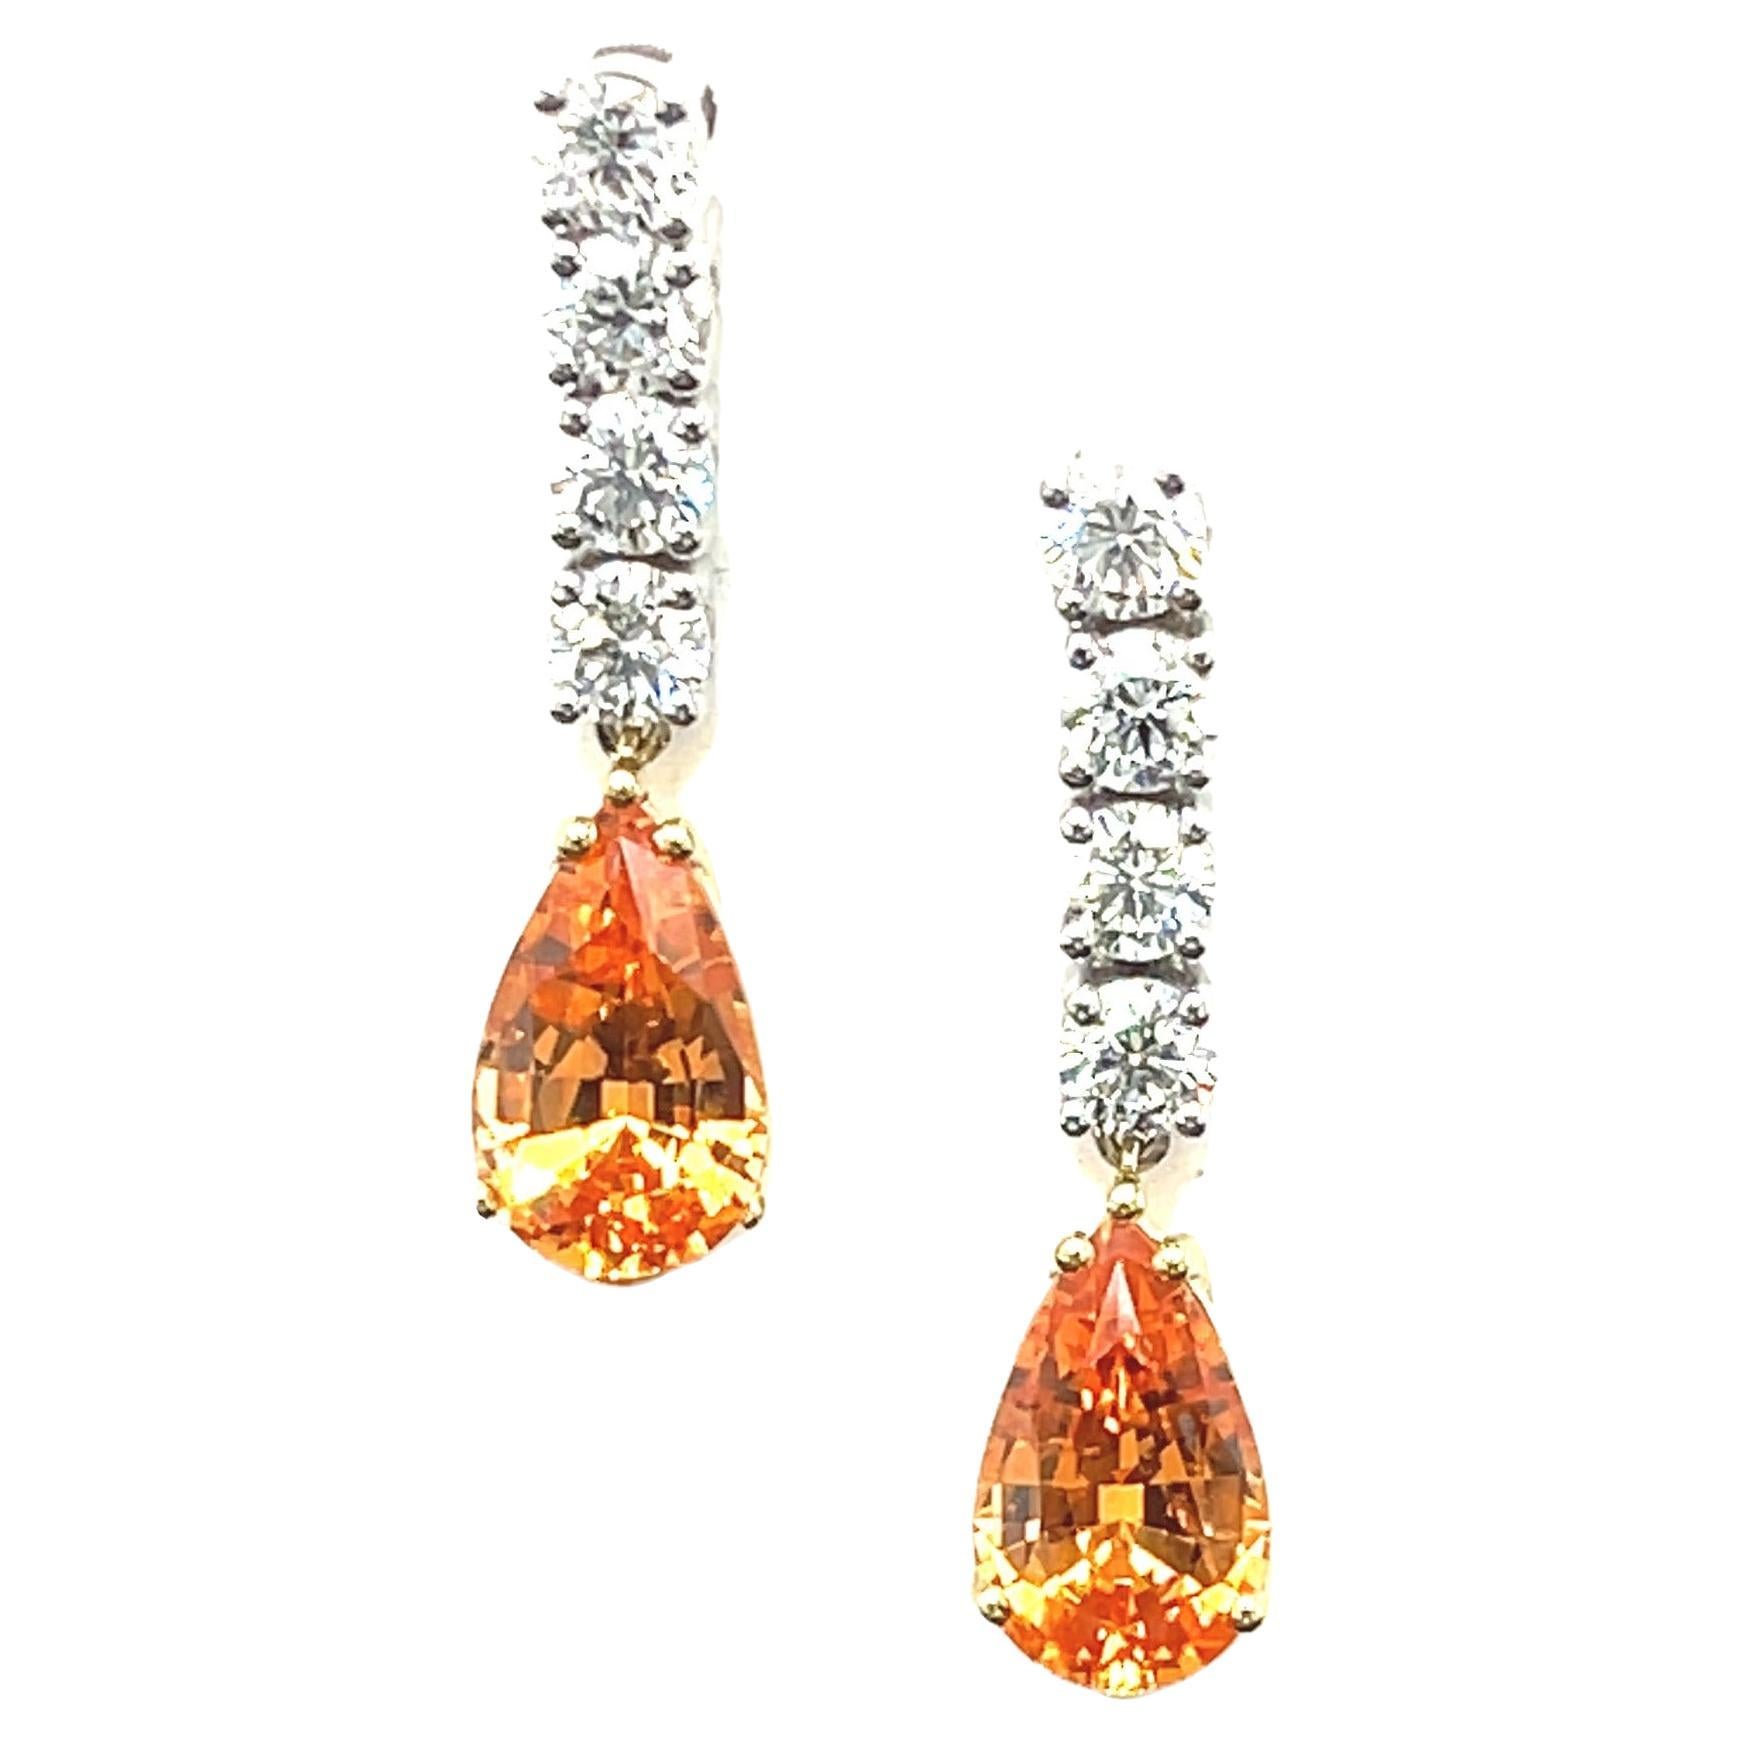 Wow! These spectacular drop earrings feature a perfectly matched pair of brilliant pear-shaped orange spessartite garnets weighing almost 2 carats apiece! Spessartite garnets, also known as spessartine are a variety of garnets originally discovered